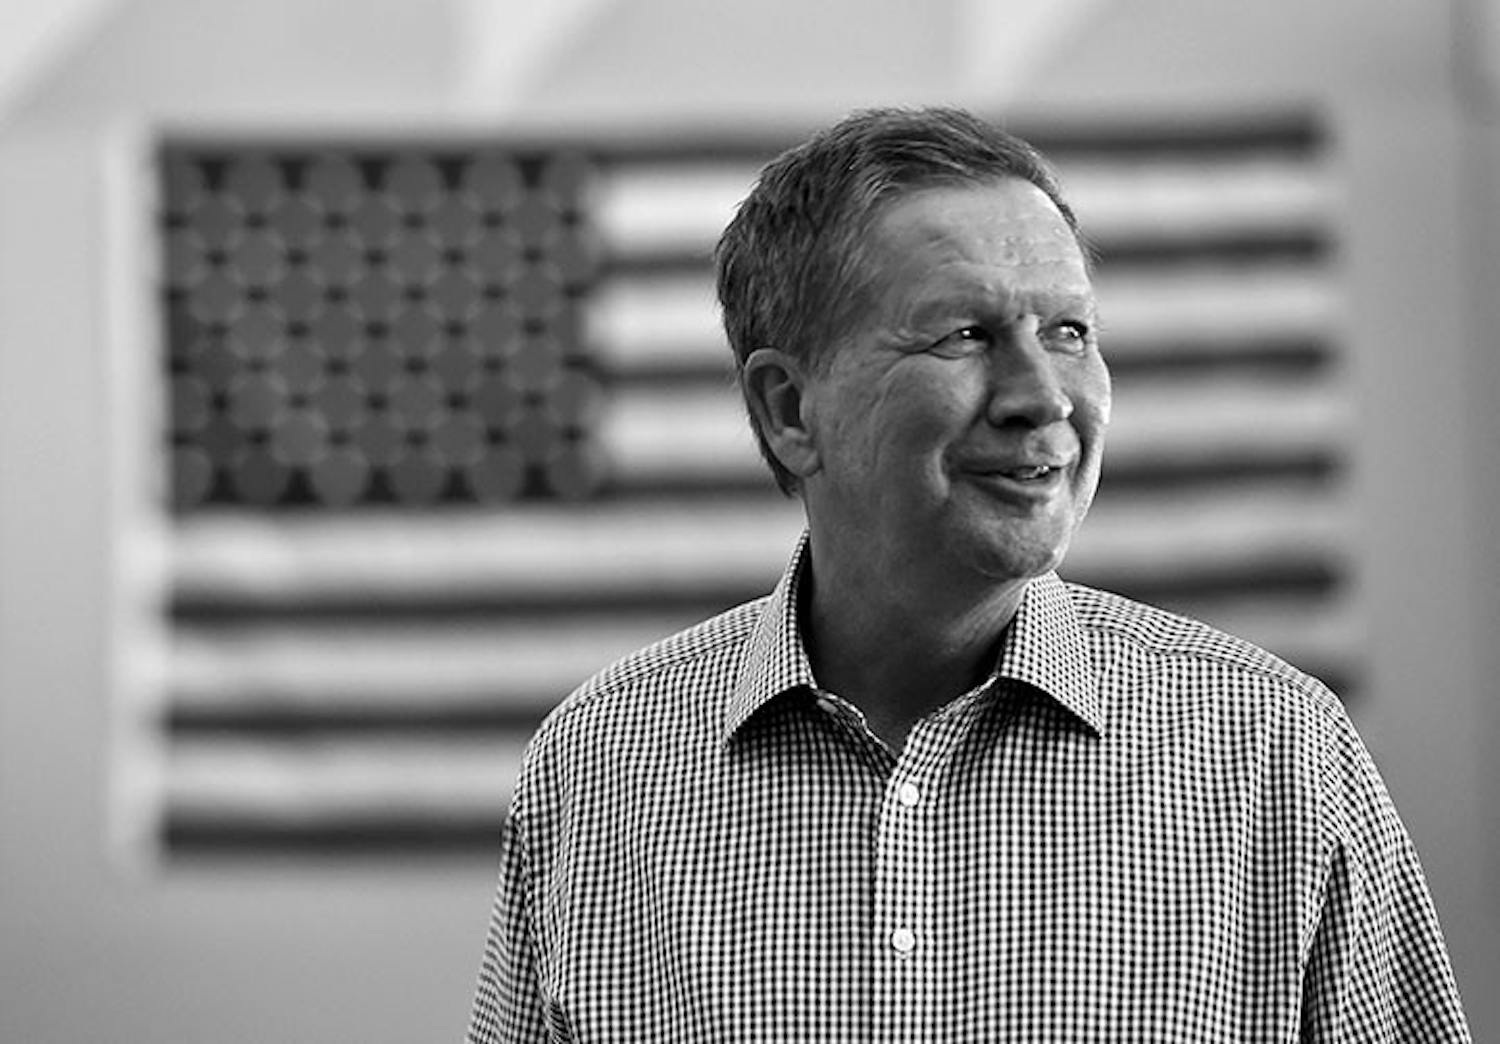 Ohio Gov. John Kasich looks on before he speaks at the Clark County Republican Party headquarters on June 11, 2015 in Las Vegas. On July 21, Kasich announced his bid for the Republican presidential nomination. (David Becker/Zuma Press/TNS) 